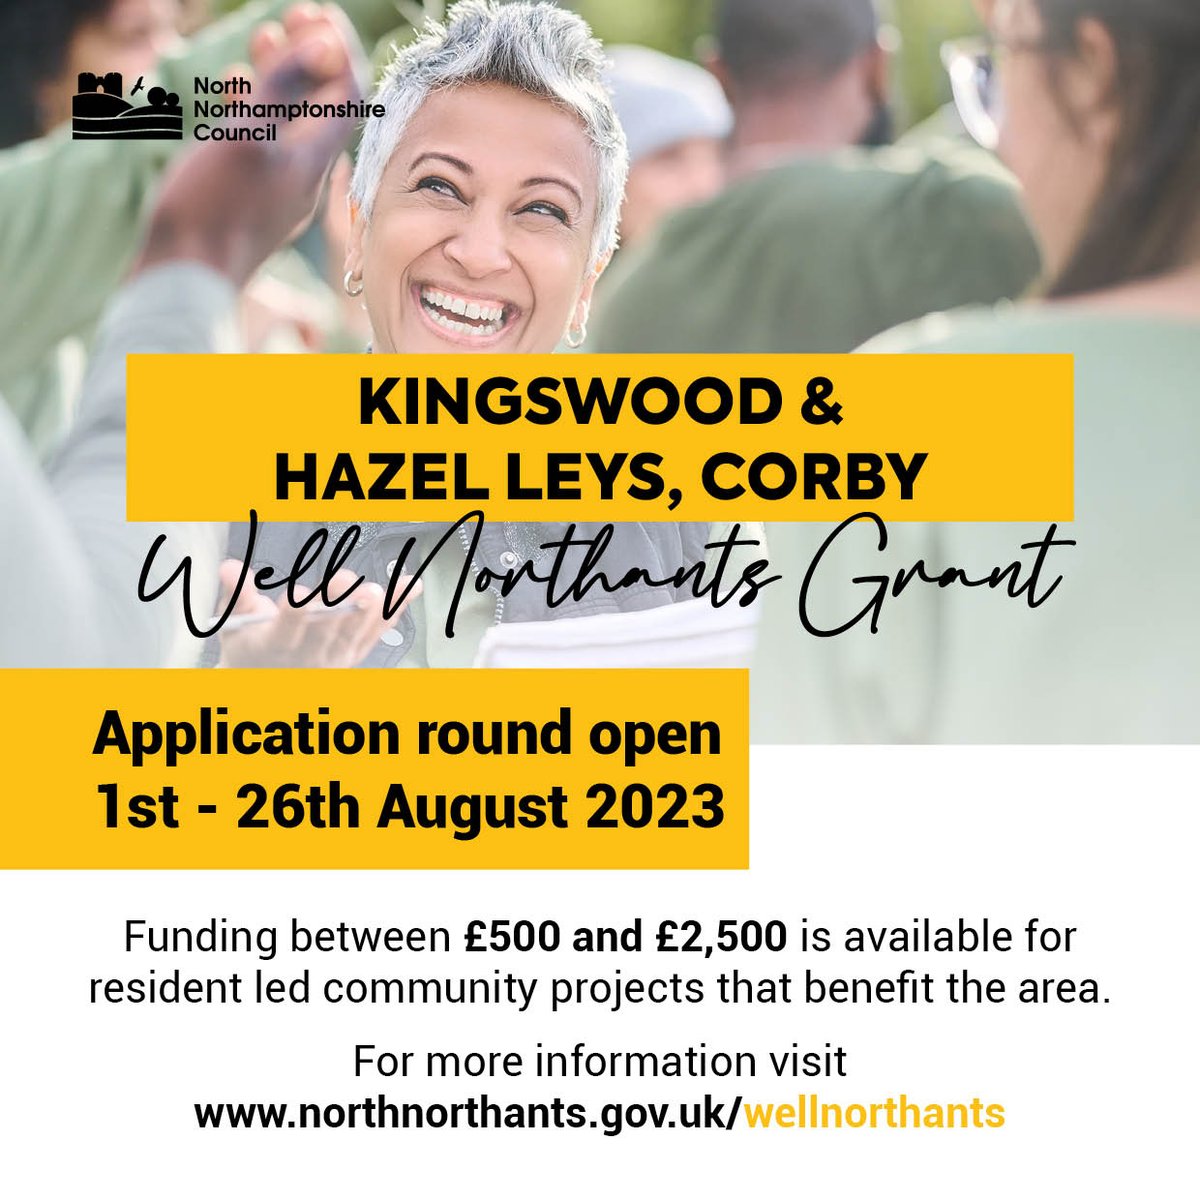 Are you living in Kingswood & Hazel Leys, Corby and have a great idea that would benefit your community? We could fund it! Find out more at bit.ly/3YD1pQ7 or email wellnorthantsnorth@northnorthants.gov.uk We look forward to hearing from you